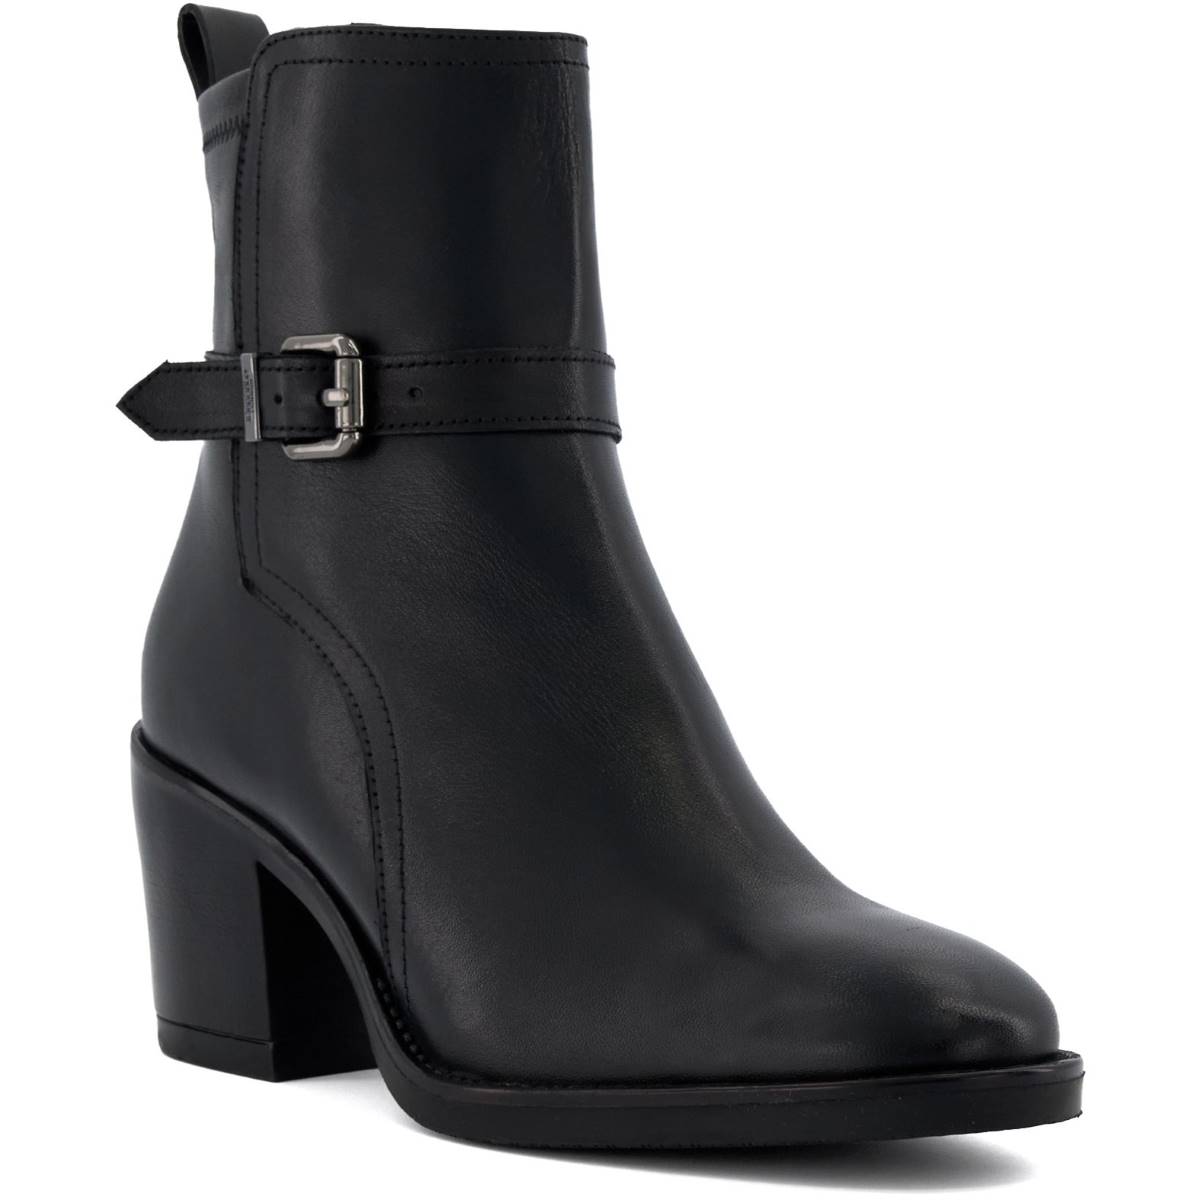 Dune London Prance Black Womens ankle boots 92506690164484 in a Plain Leather in Size 7